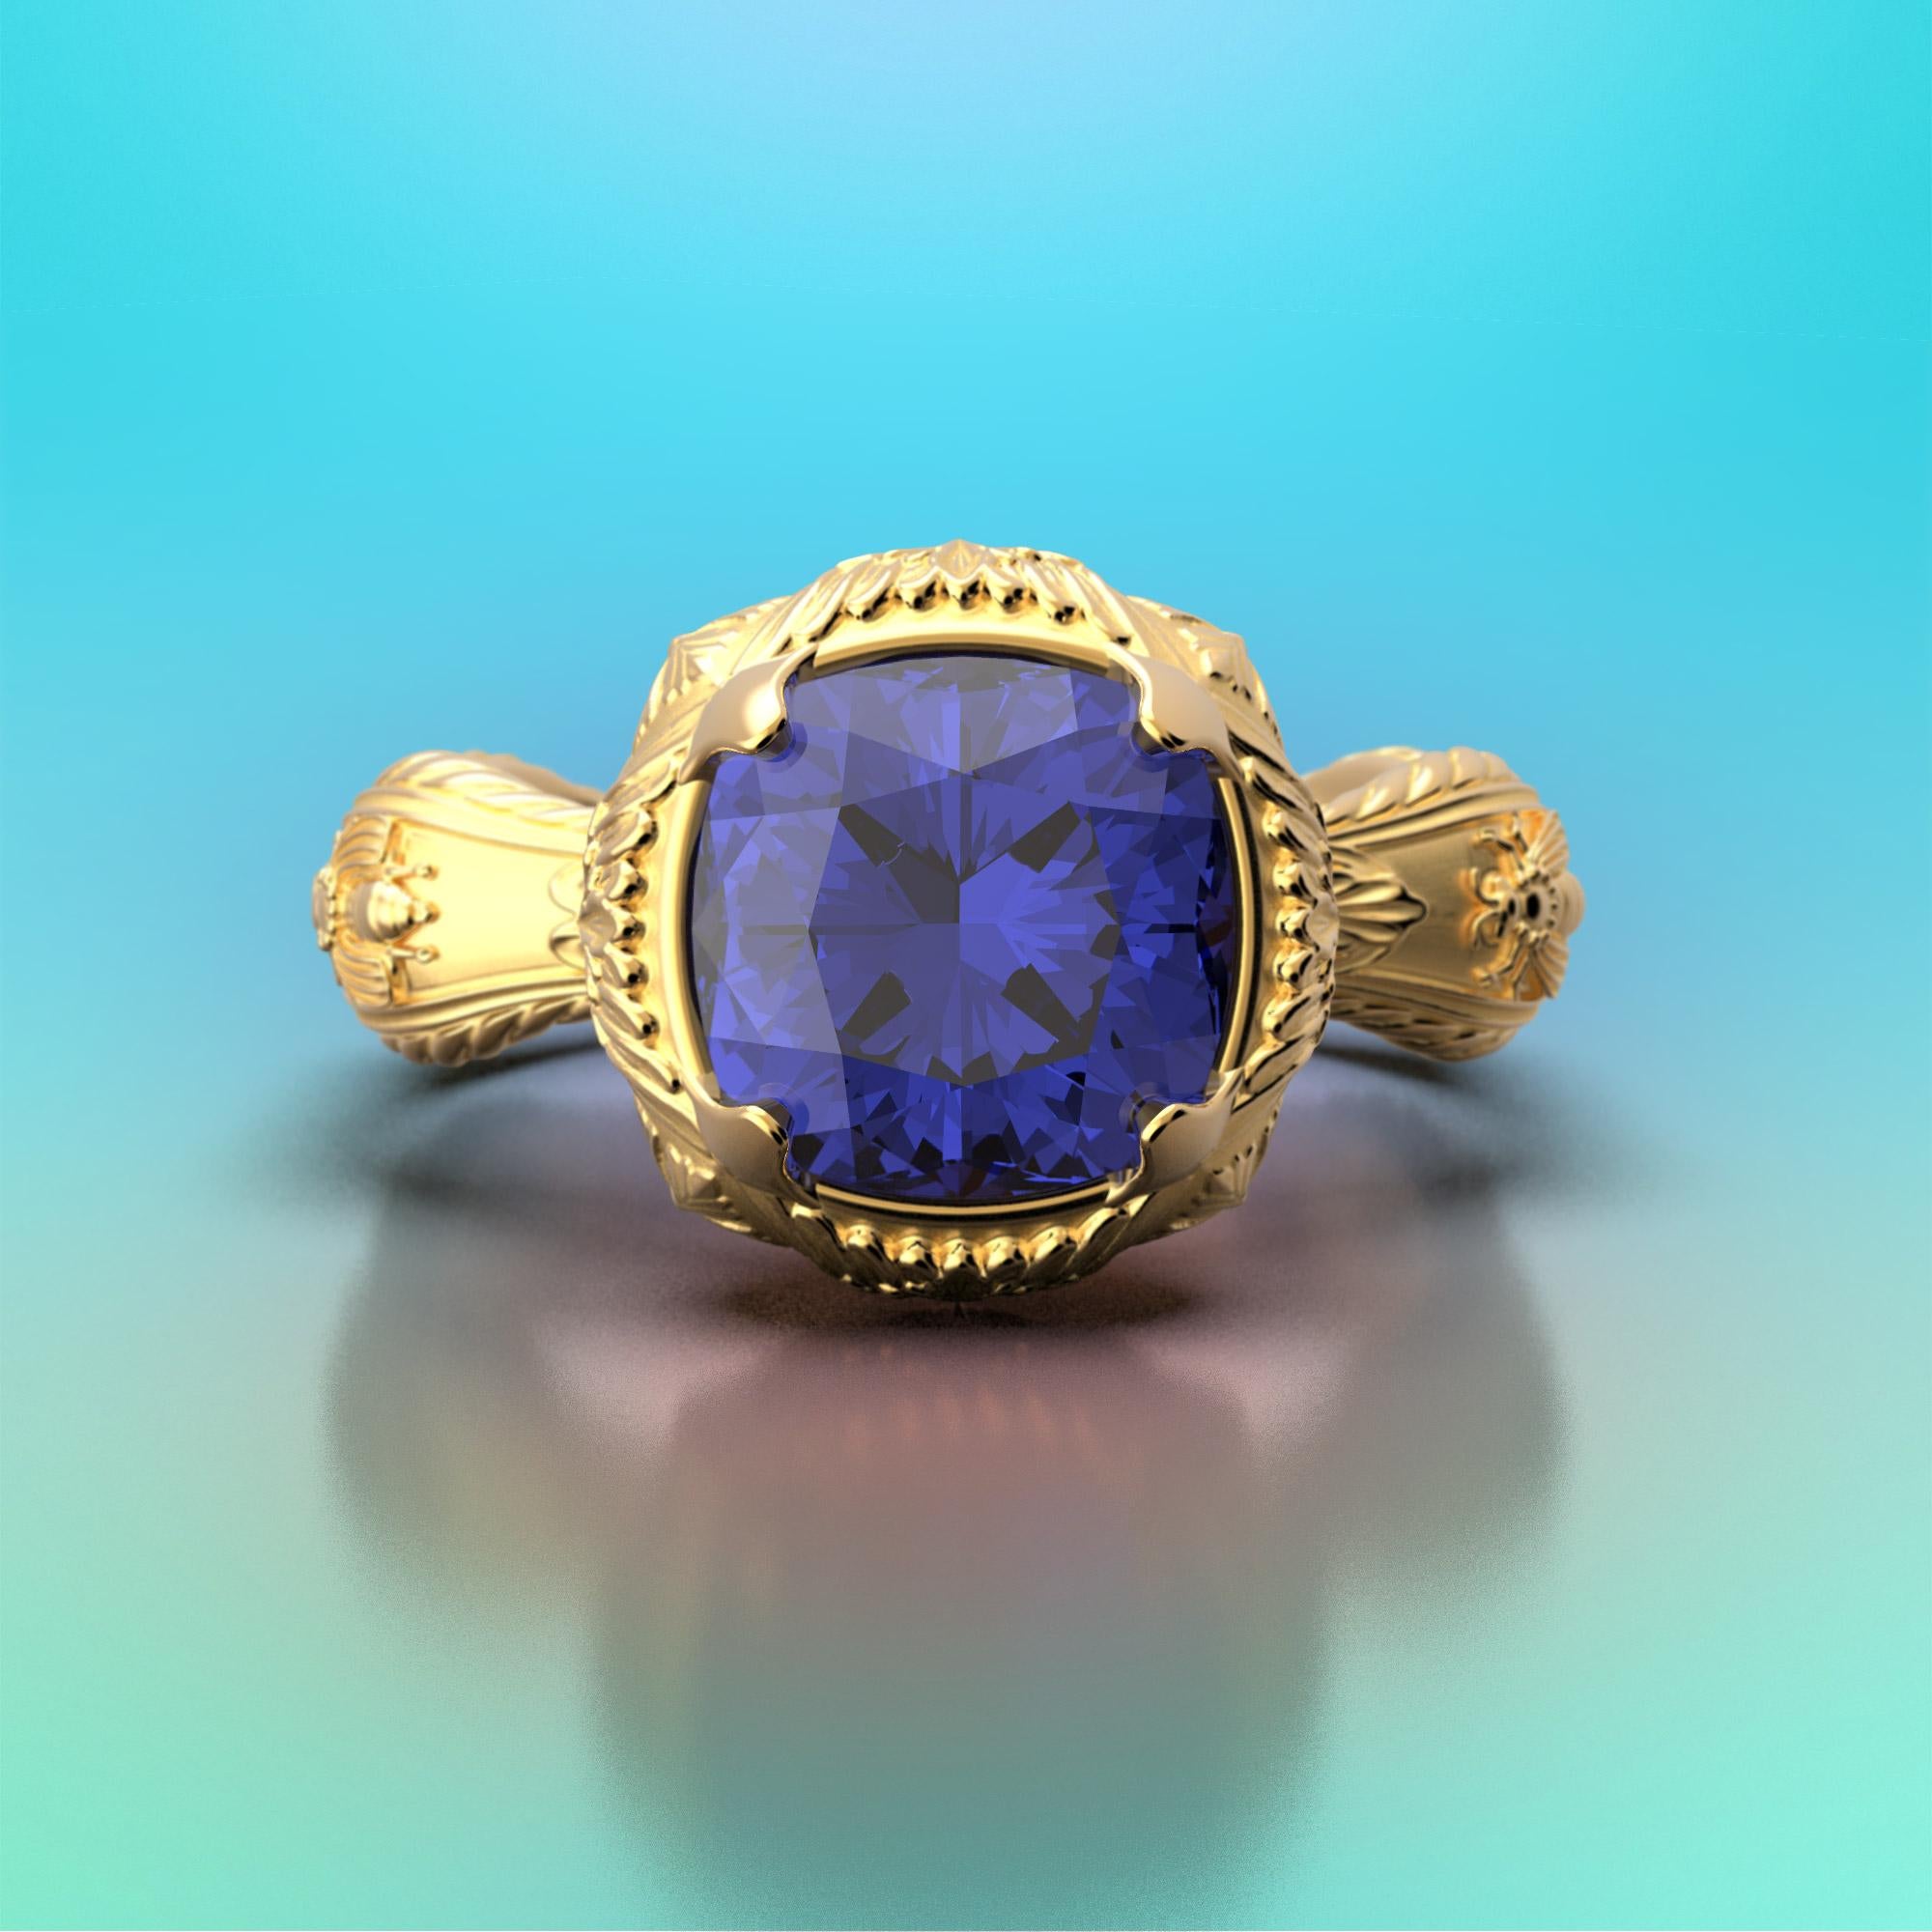 For Sale:  Top Quality Tanzanite Ring in 14k Gold Made in Italy by Oltremare Gioielli 2